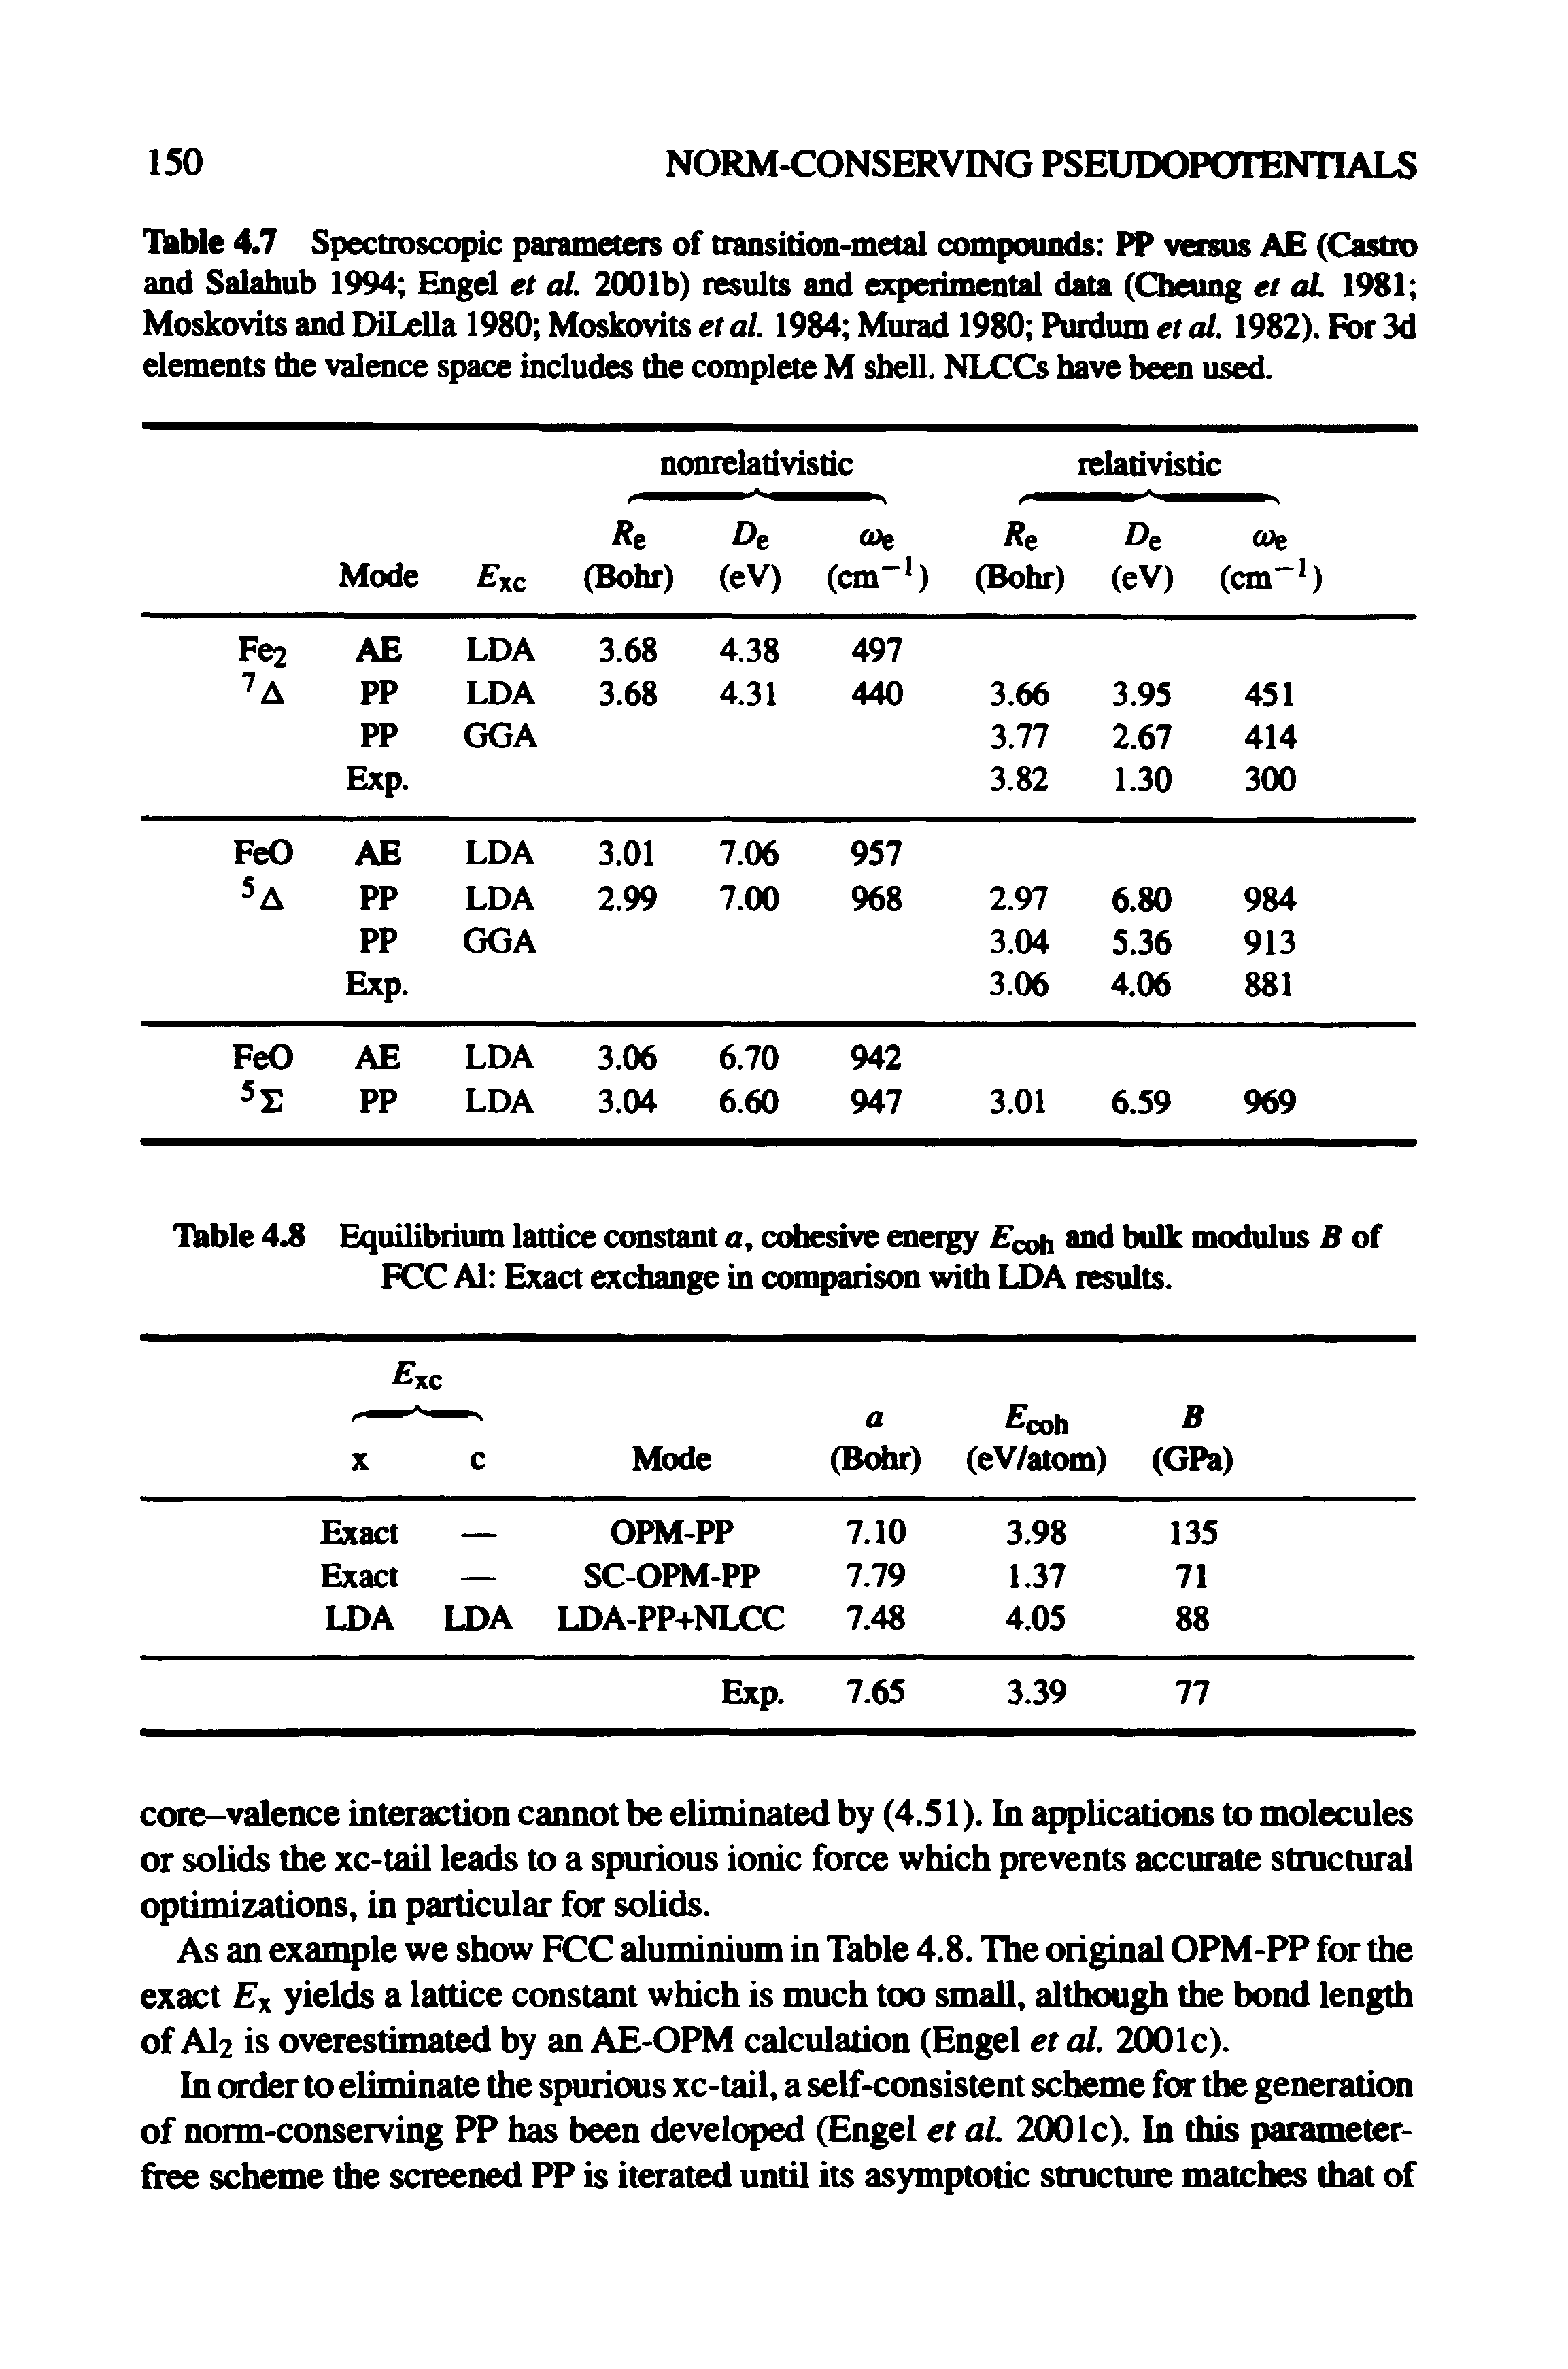 Table 4.8 Equilibrium lattice constant a, cohesive energy and bulk modulus B of FCC Al Exact exchange in comparison with LDA results.